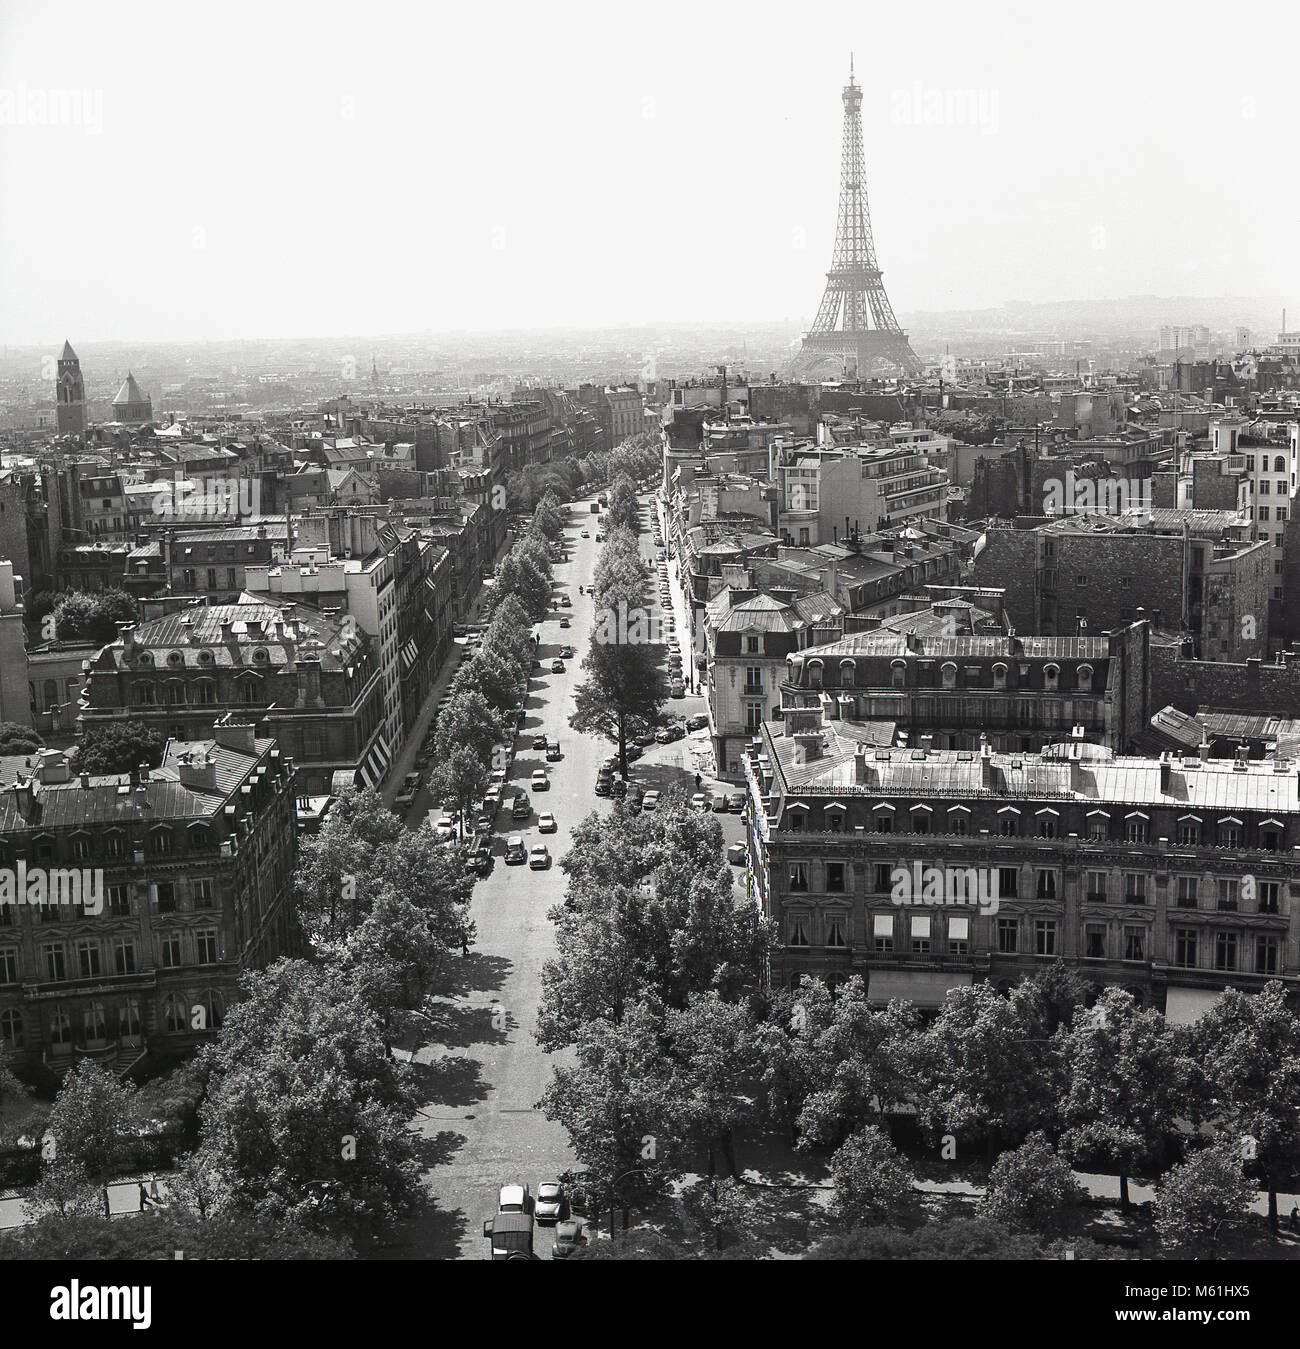 1950s, Paris, France, historical, overhead picture of the city and of a long tree-lined boulevard in Paris leading to it's most famous landmark, the Eiffel Tower, a wrought iron lattice tower constructed as the entrance to the 1889 World's fair. Stock Photo